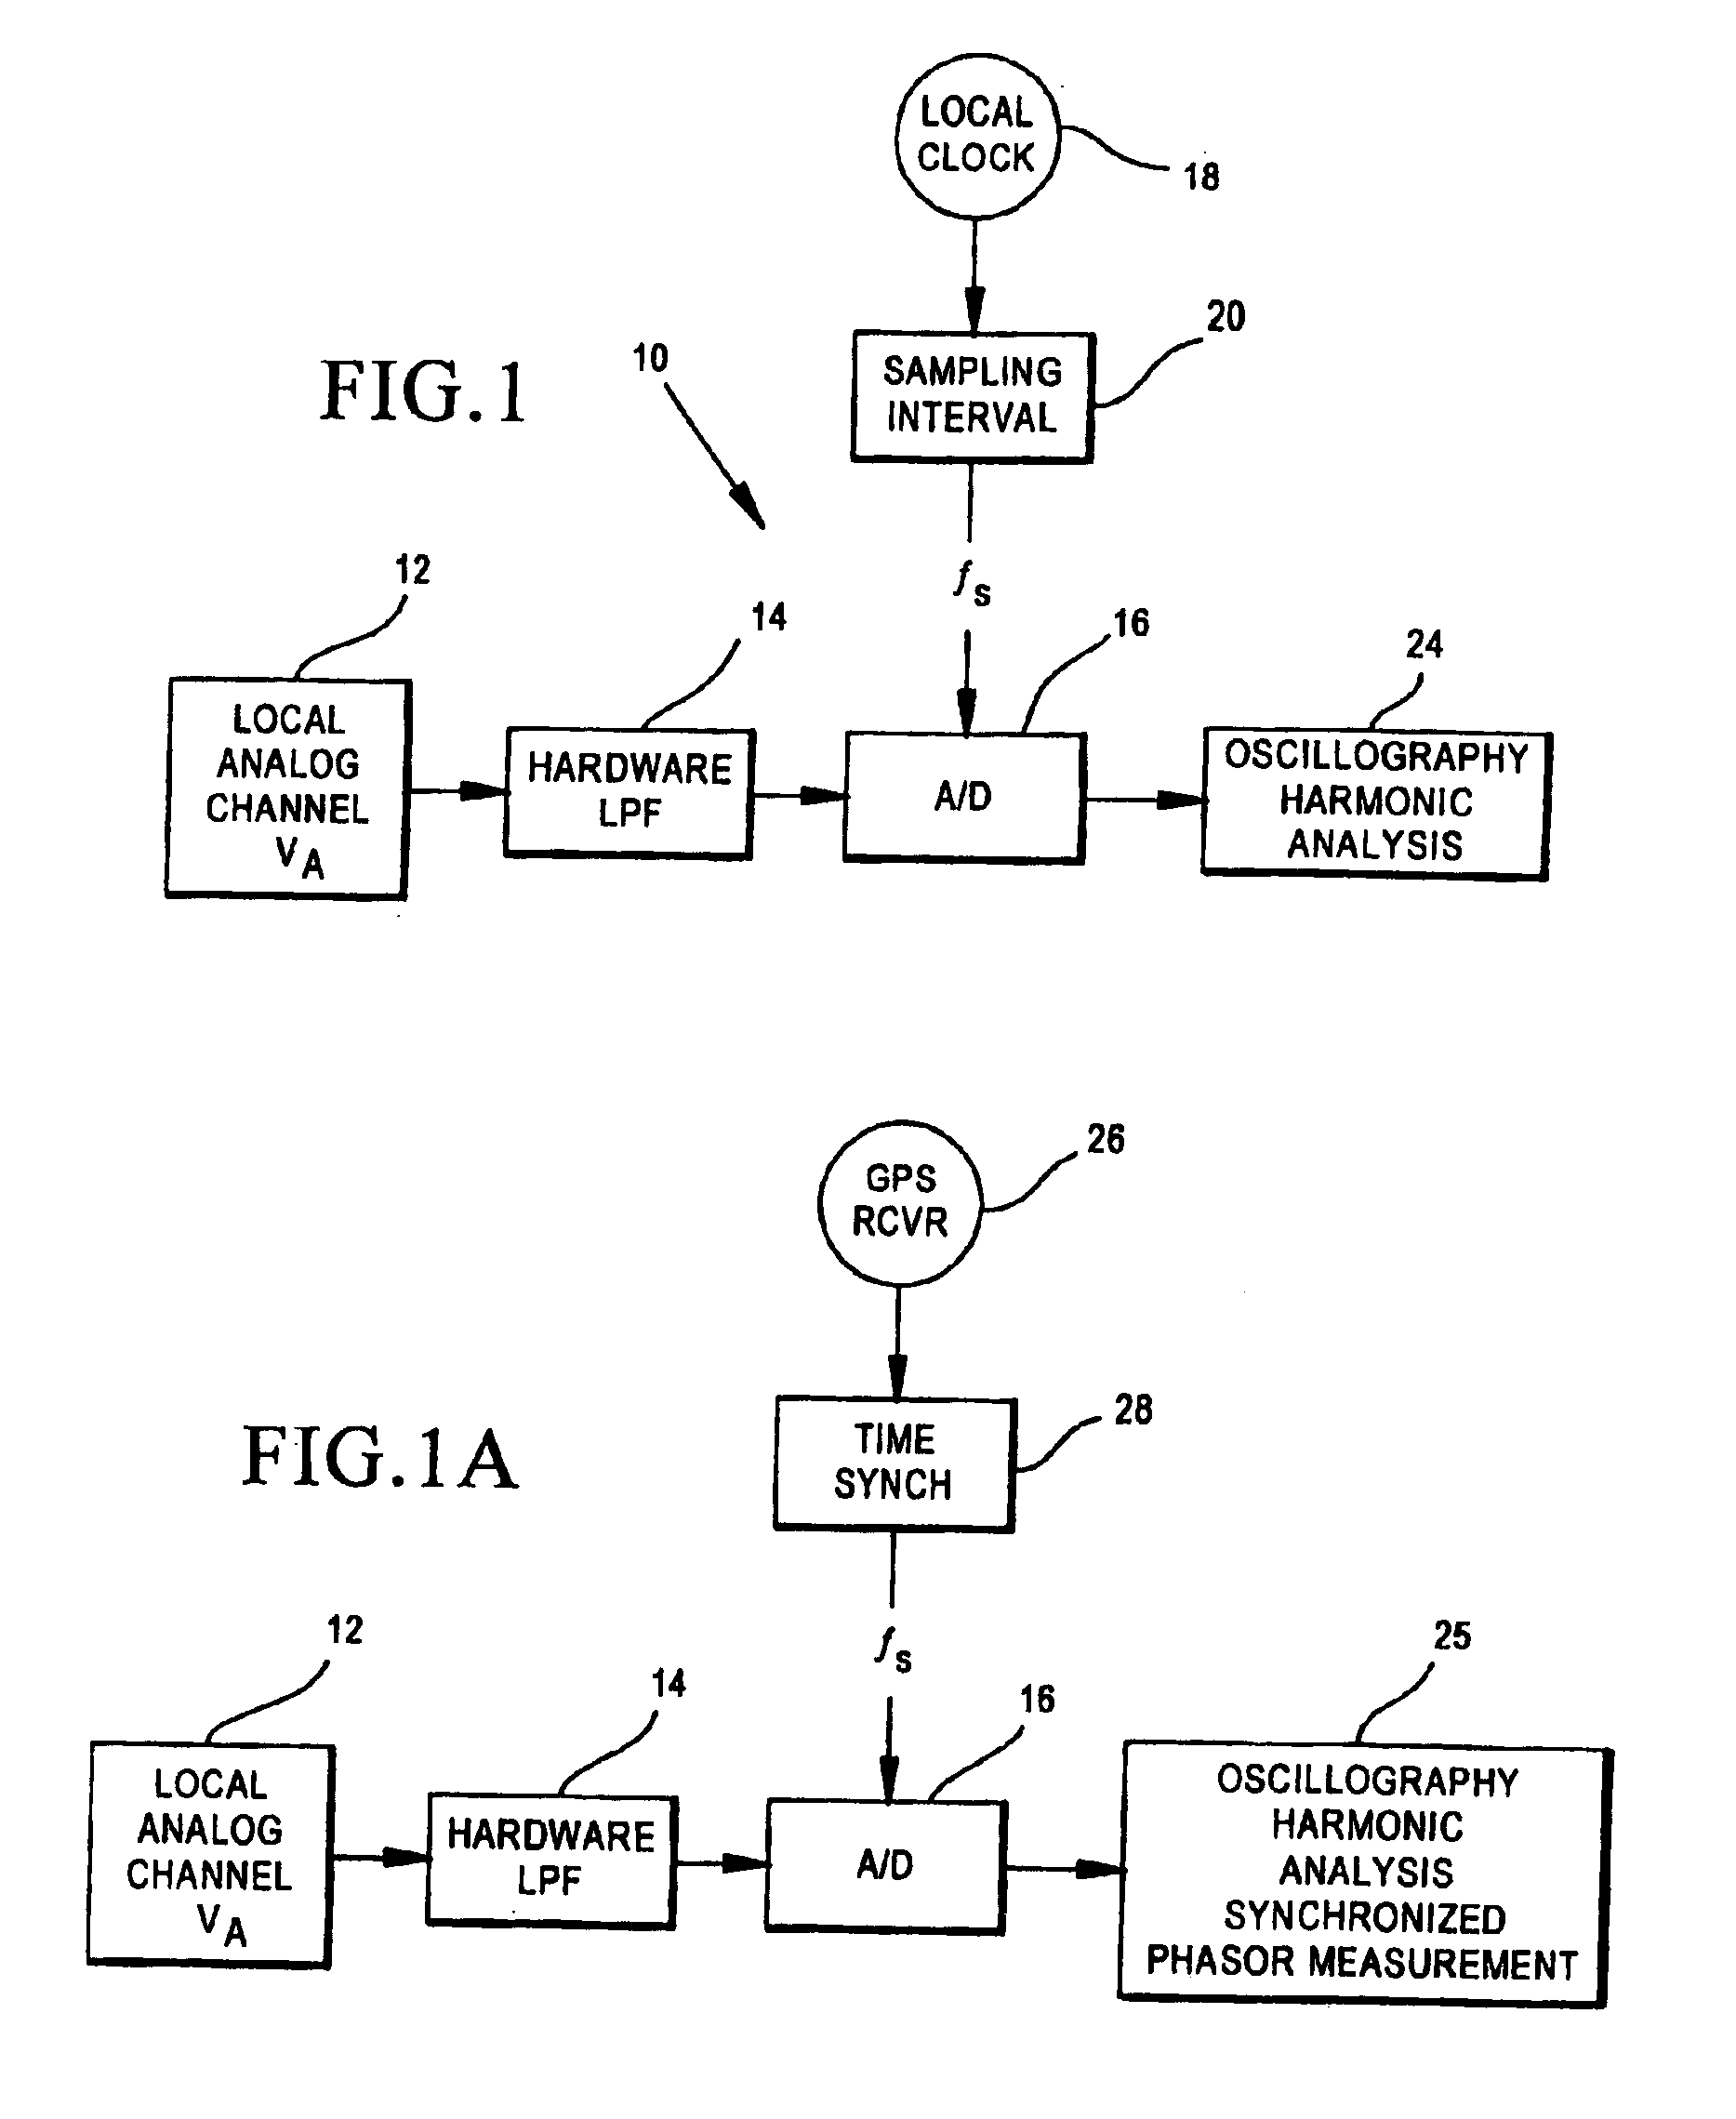 Protective relay with synchronized phasor measurement capability for use in electric power systems